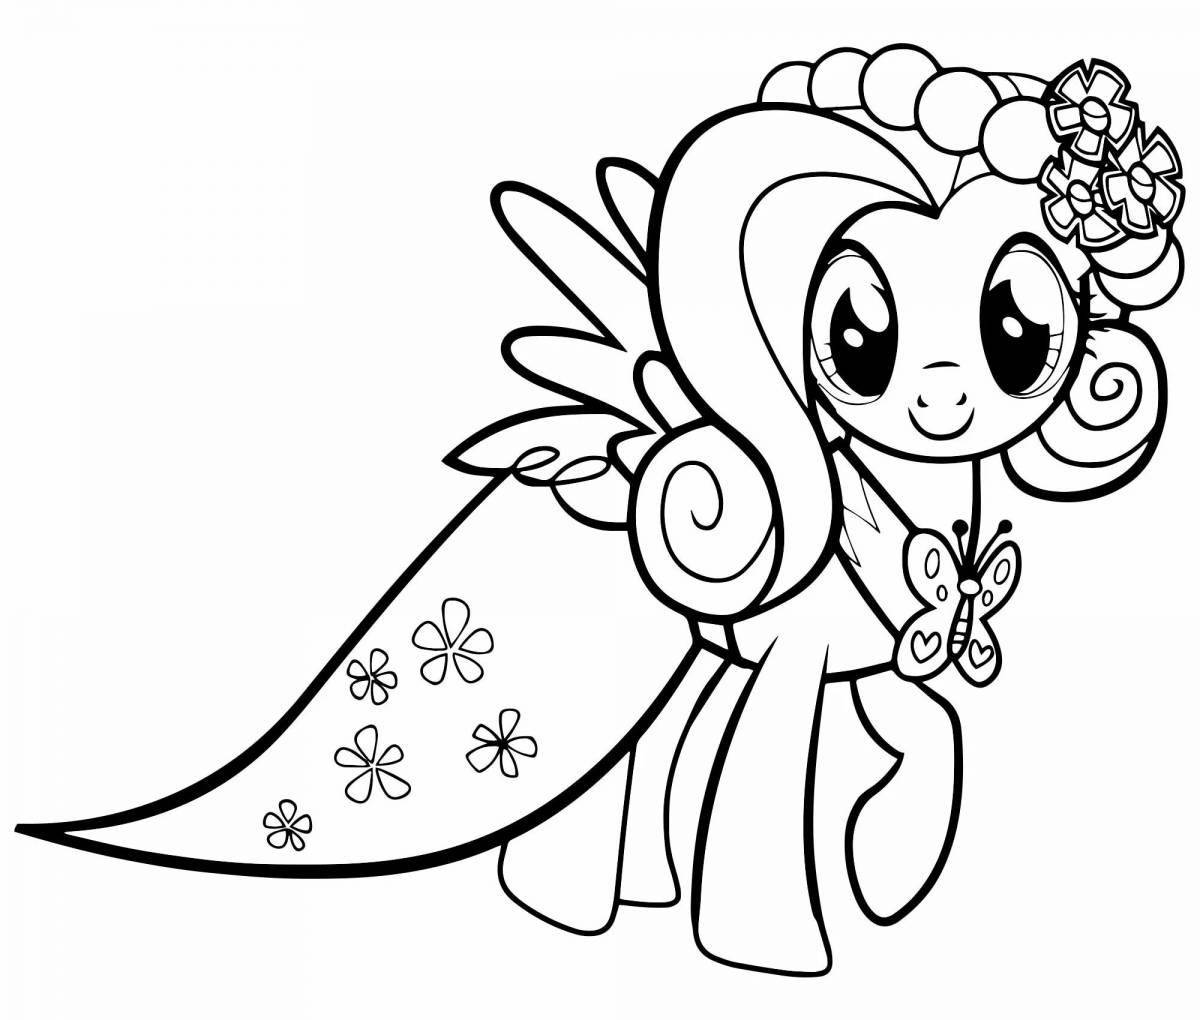 Playful watershine pony coloring page